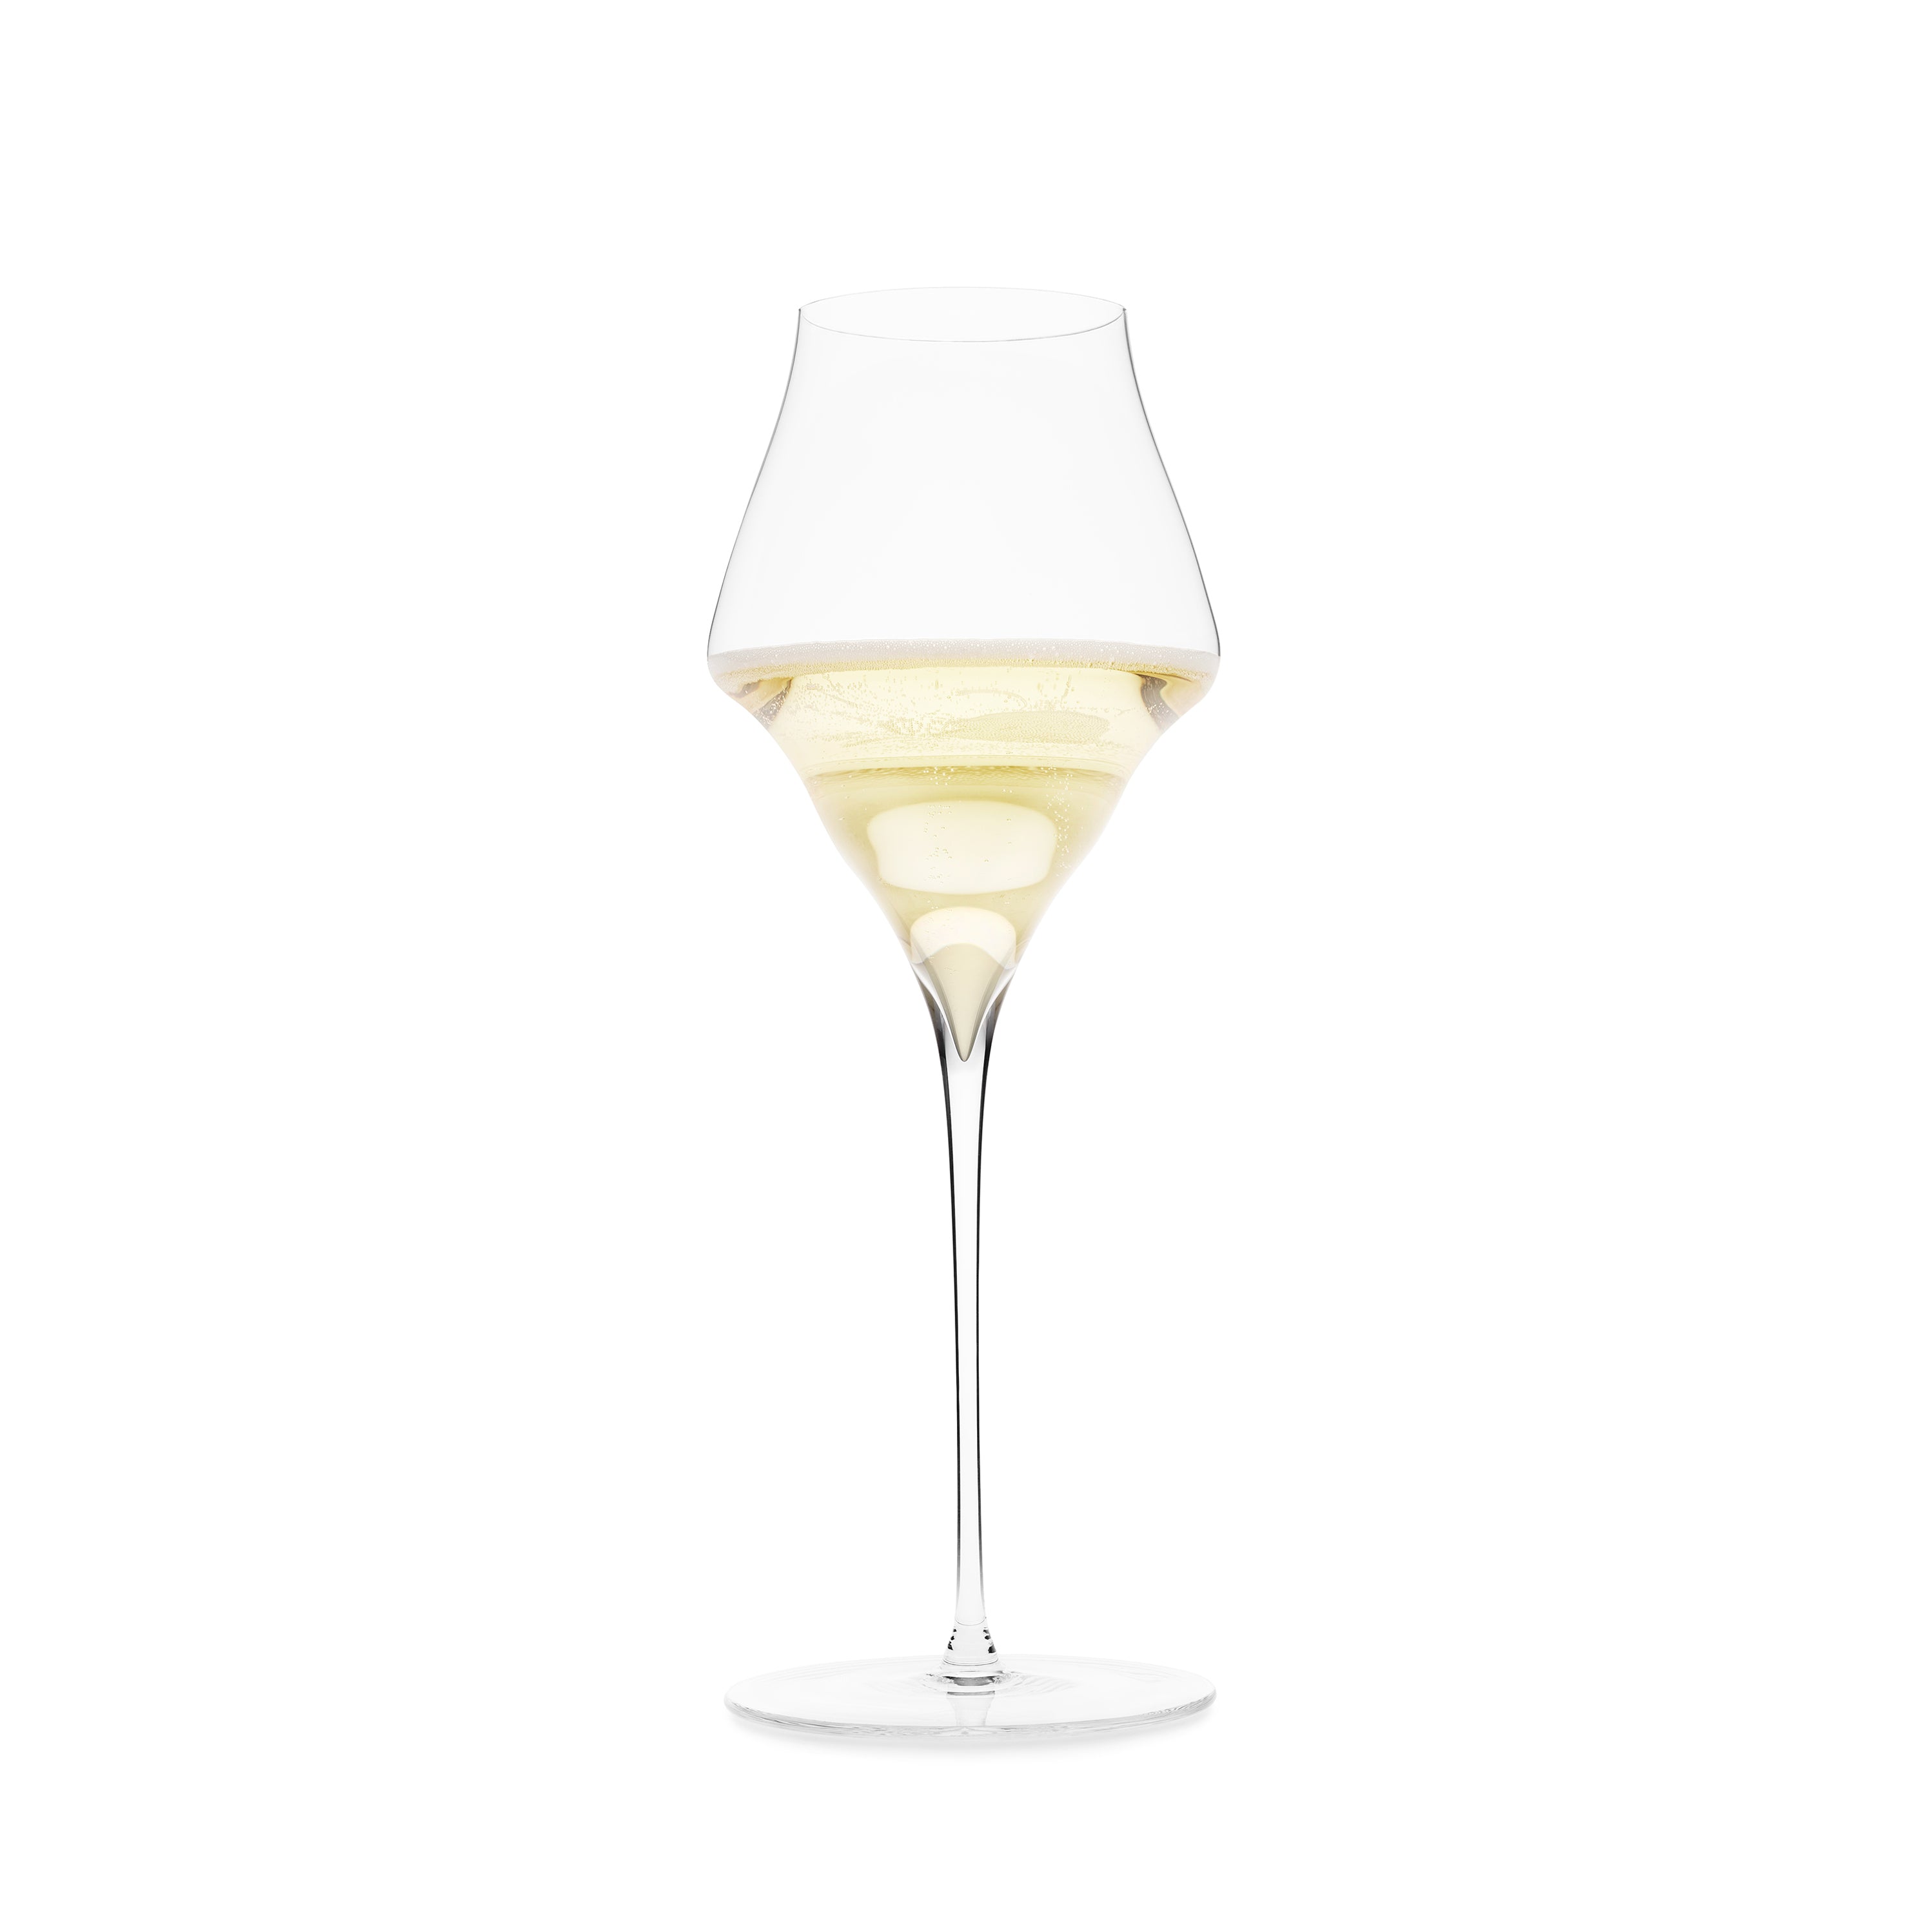 Filled champagne glass – JOSEPHINE No 2 by Josephinenhütte